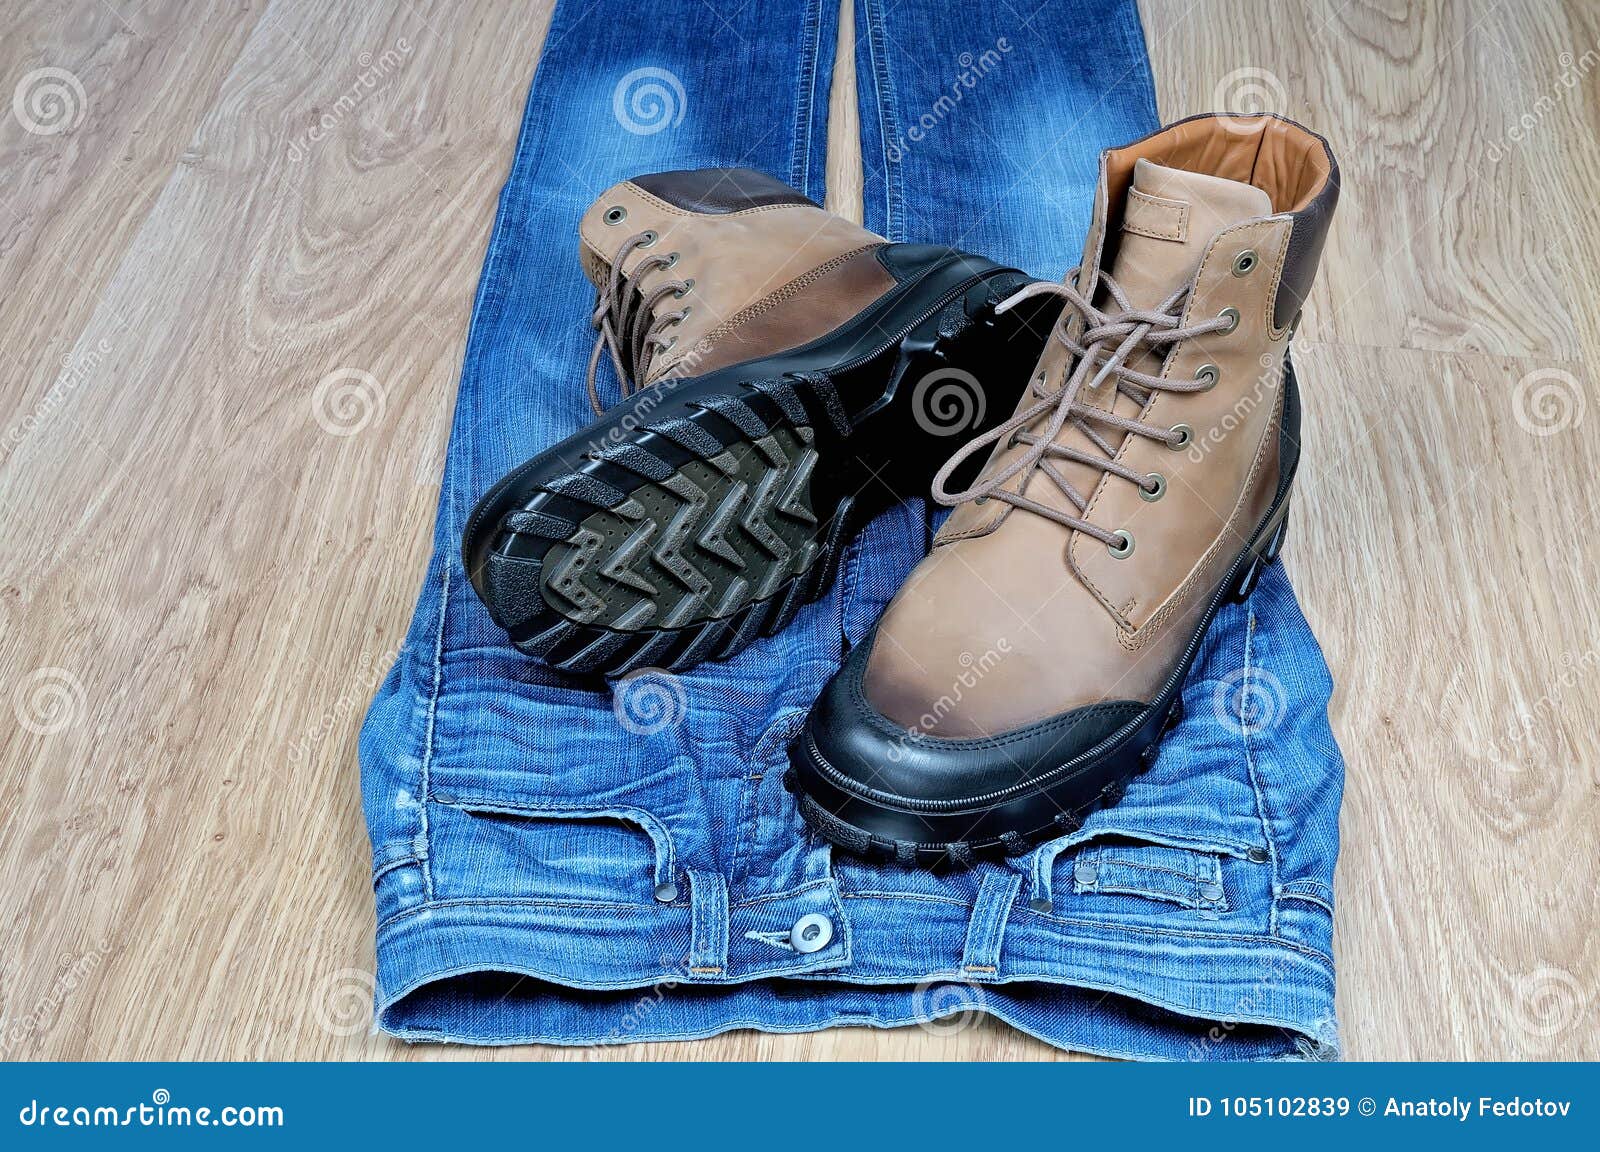 Men`s Leather Boots on Blue Jeans Stock Image - Image of foot, floor ...